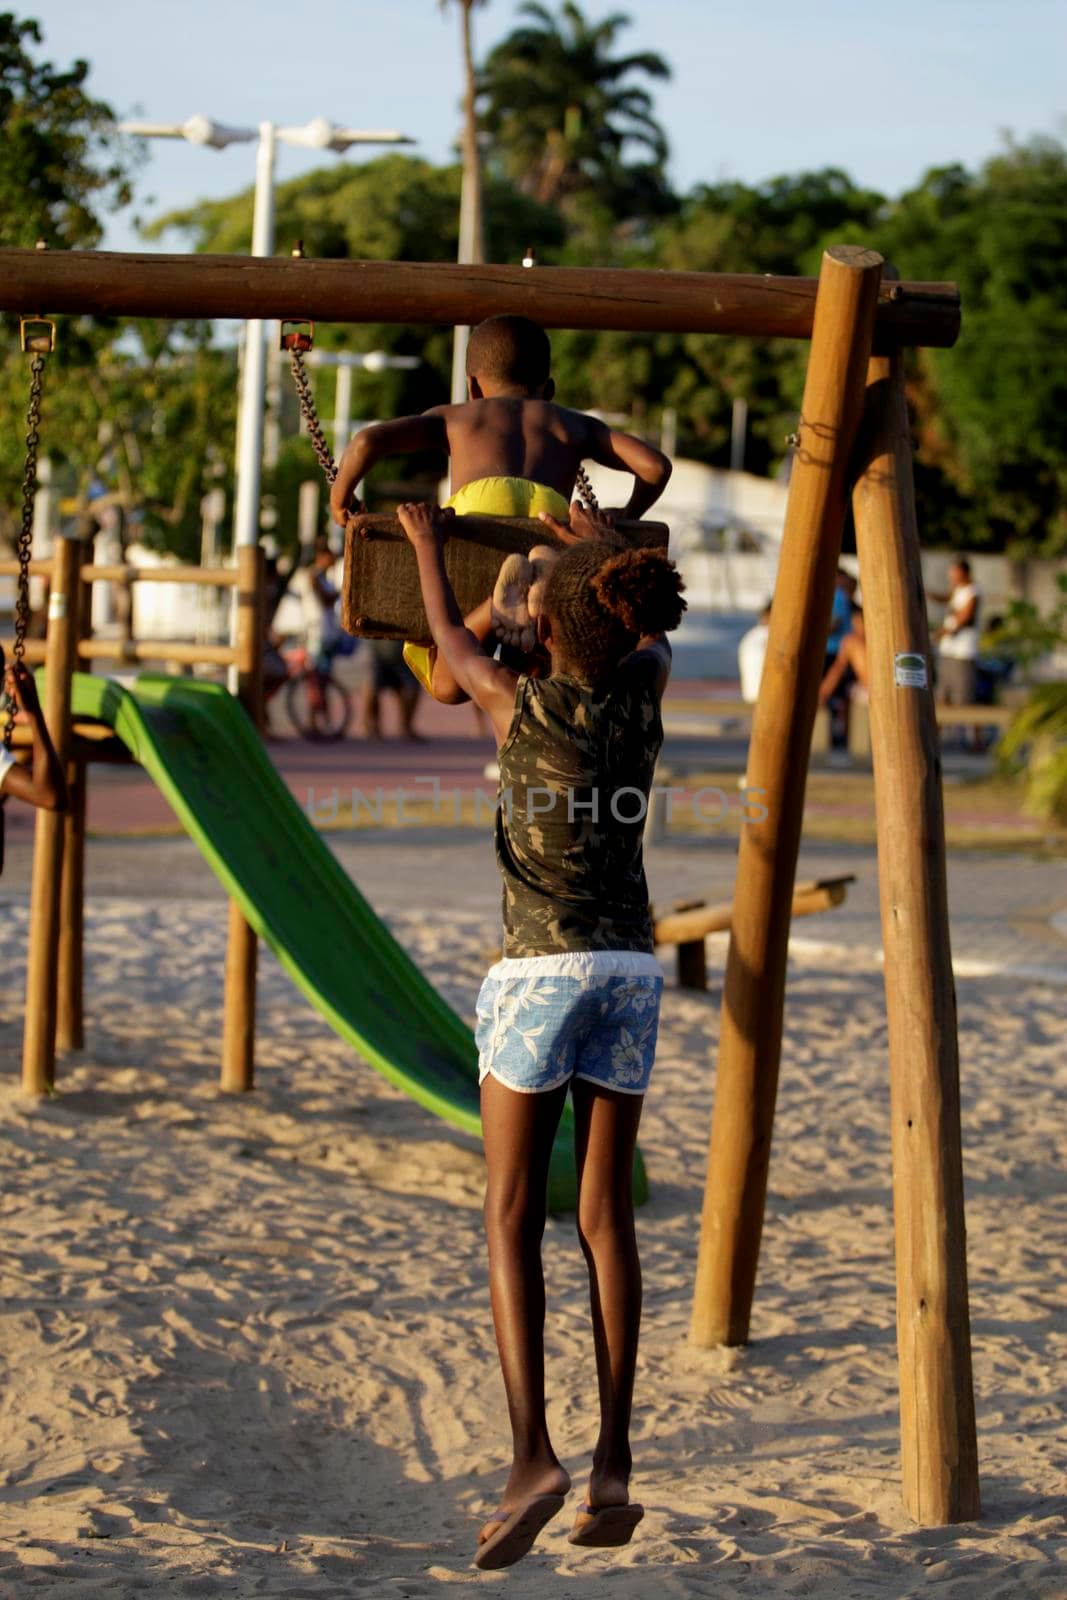 salvador, bahia / brazil - december 1, 2015: Children are seen playing on a playground in the Sao Tome de Paripe neighborhood in the city of Salvador.